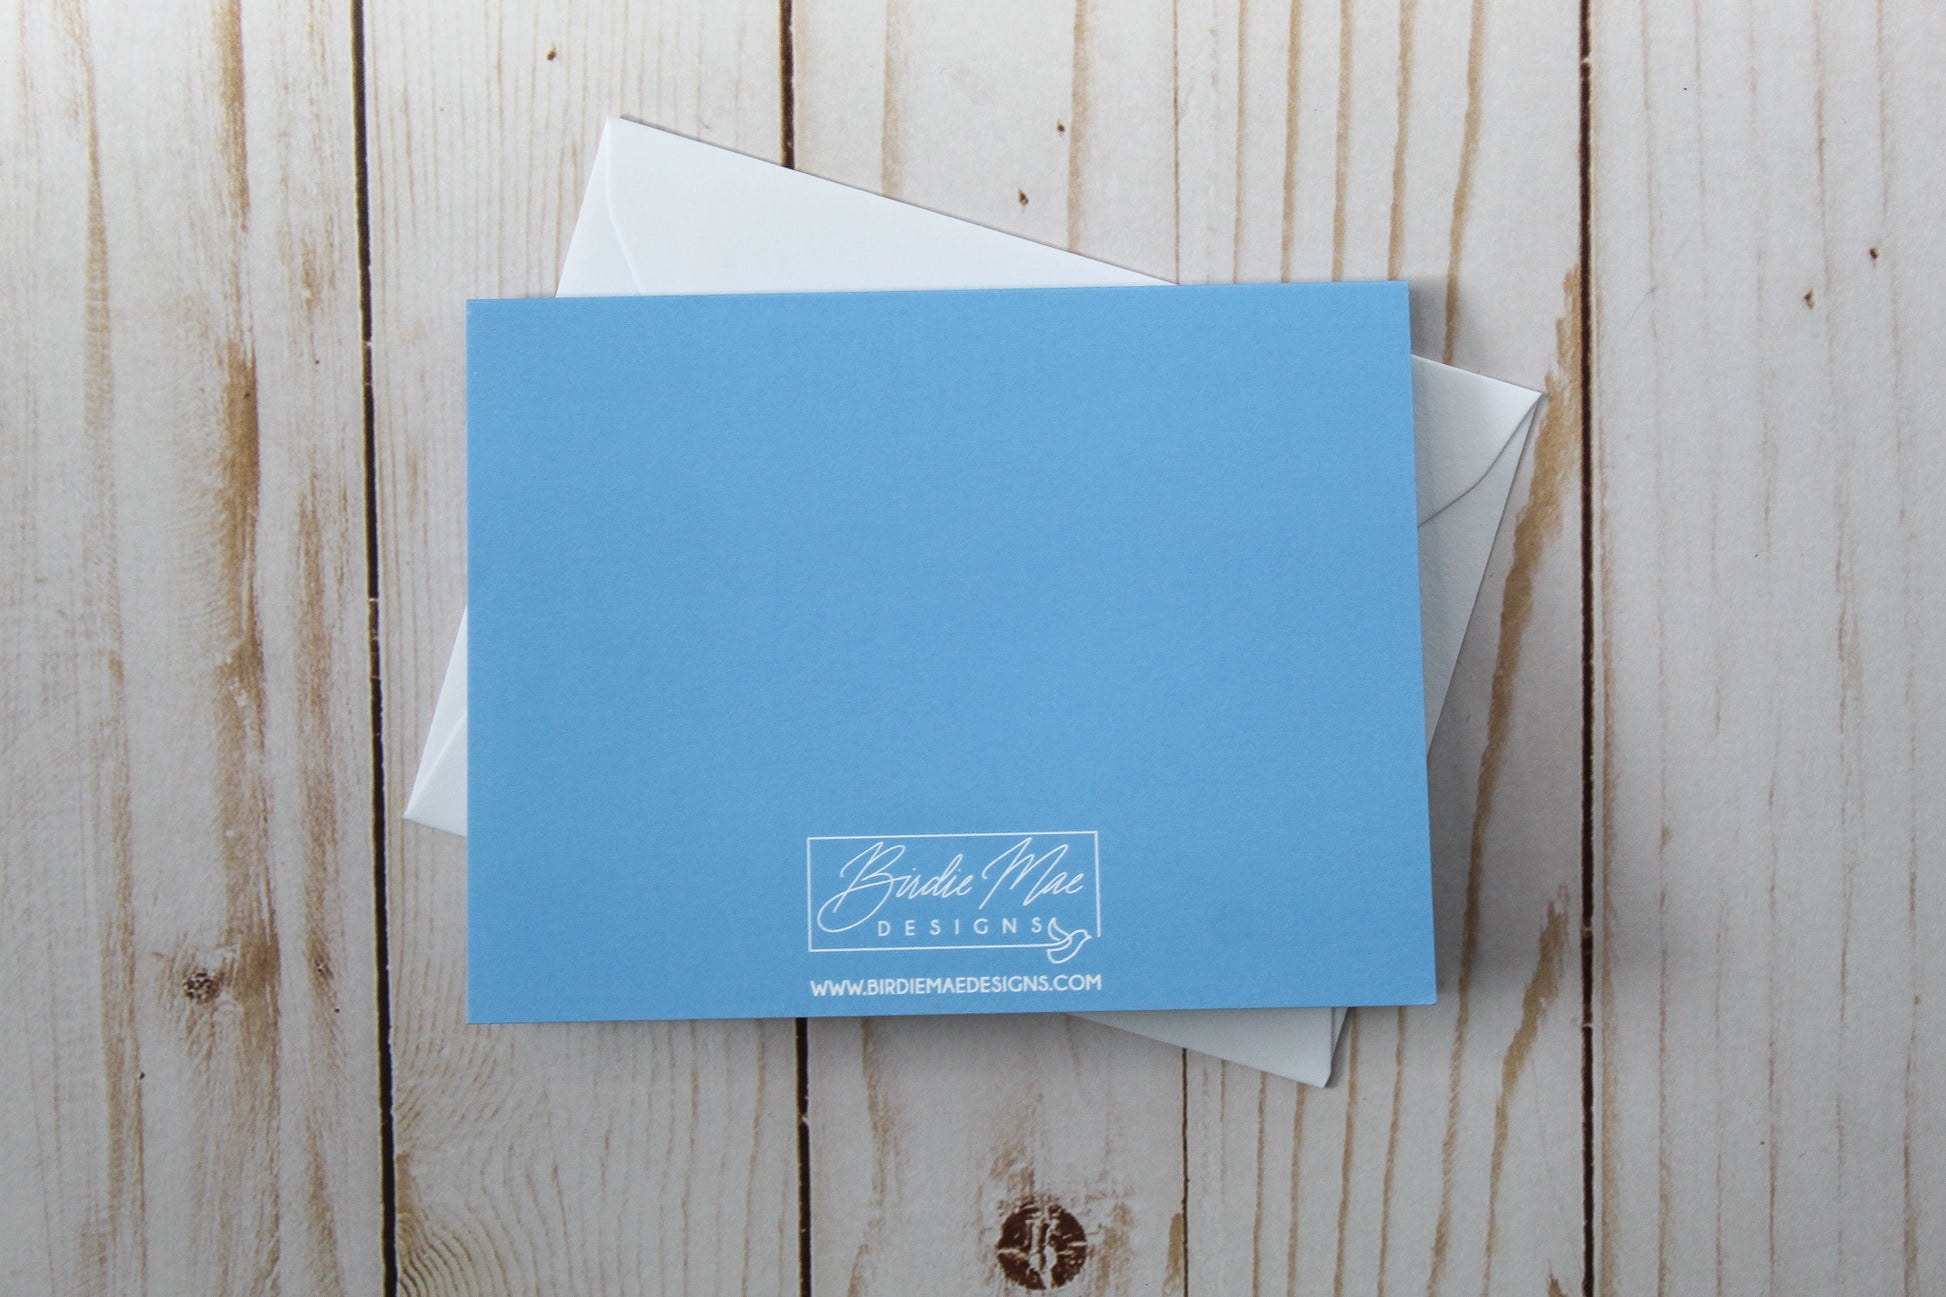 'A Treat For Someone So Sweet' card boasts a charming cupcake design against a blue backdrop. These cards are thoughtfully folded to a size of 4.25" in height by 5.5" in width, leaving the inside blank for your personal message.